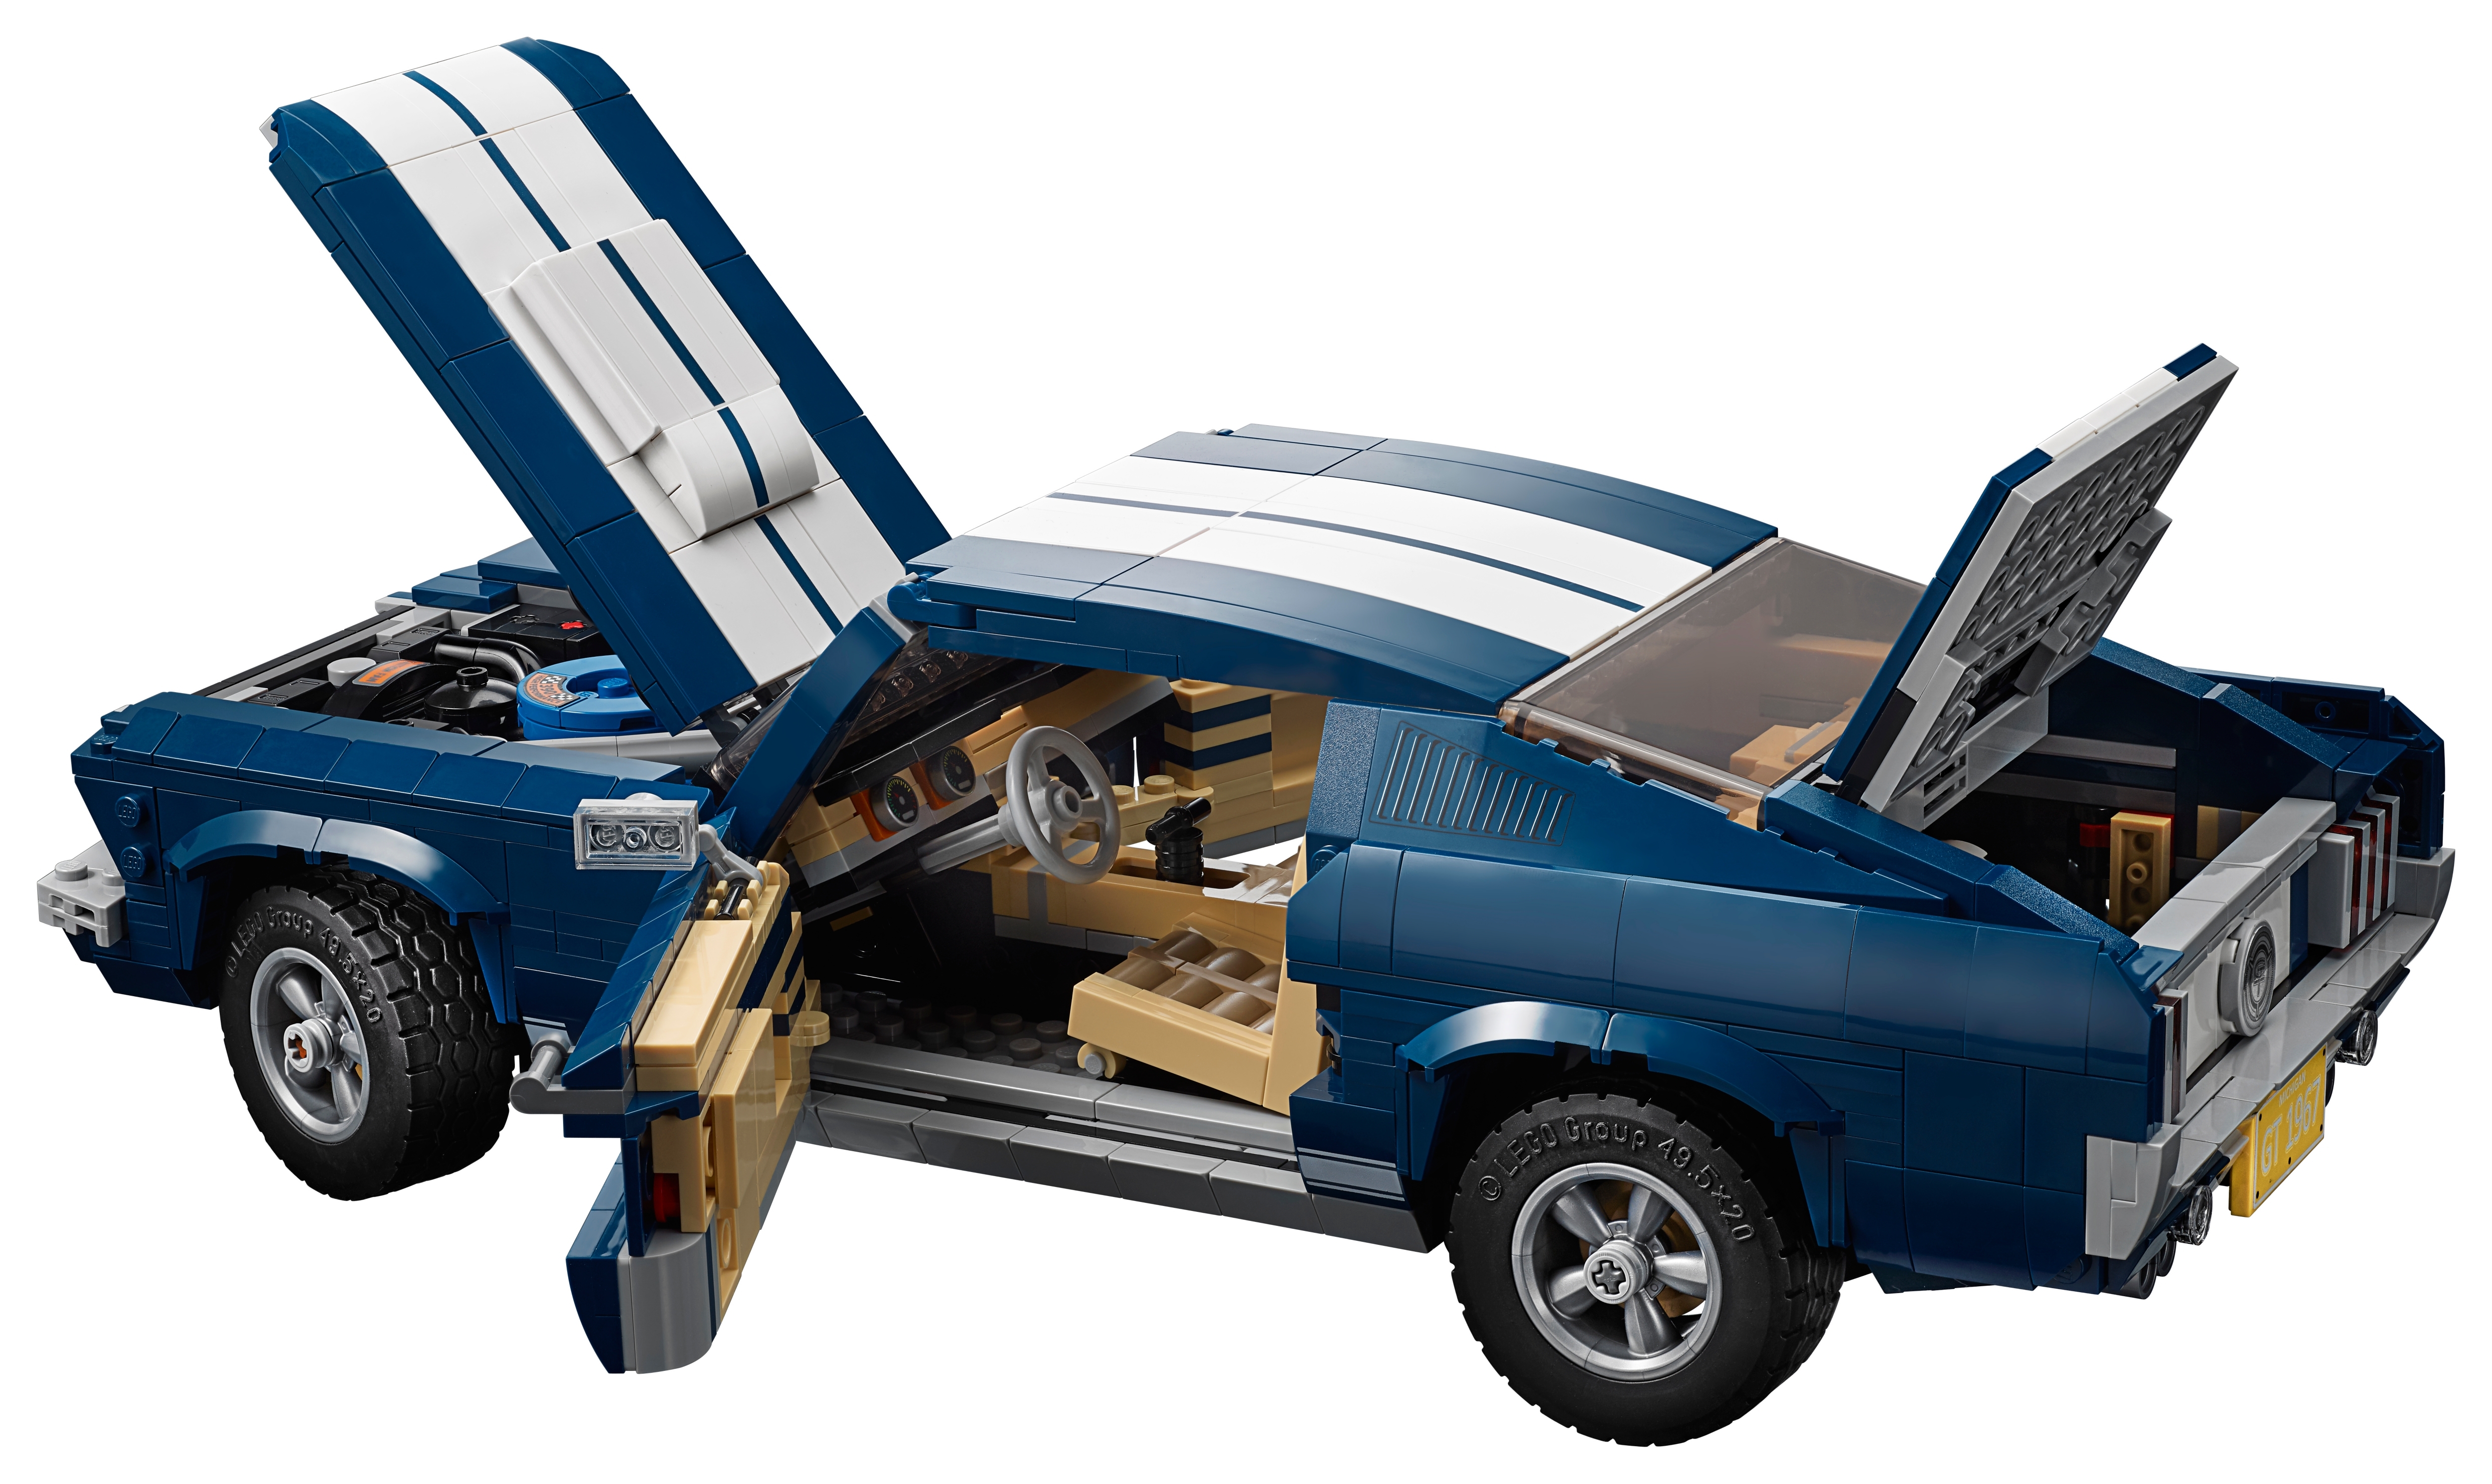 Ford Mustang 10265 | Creator | LEGO® Shop